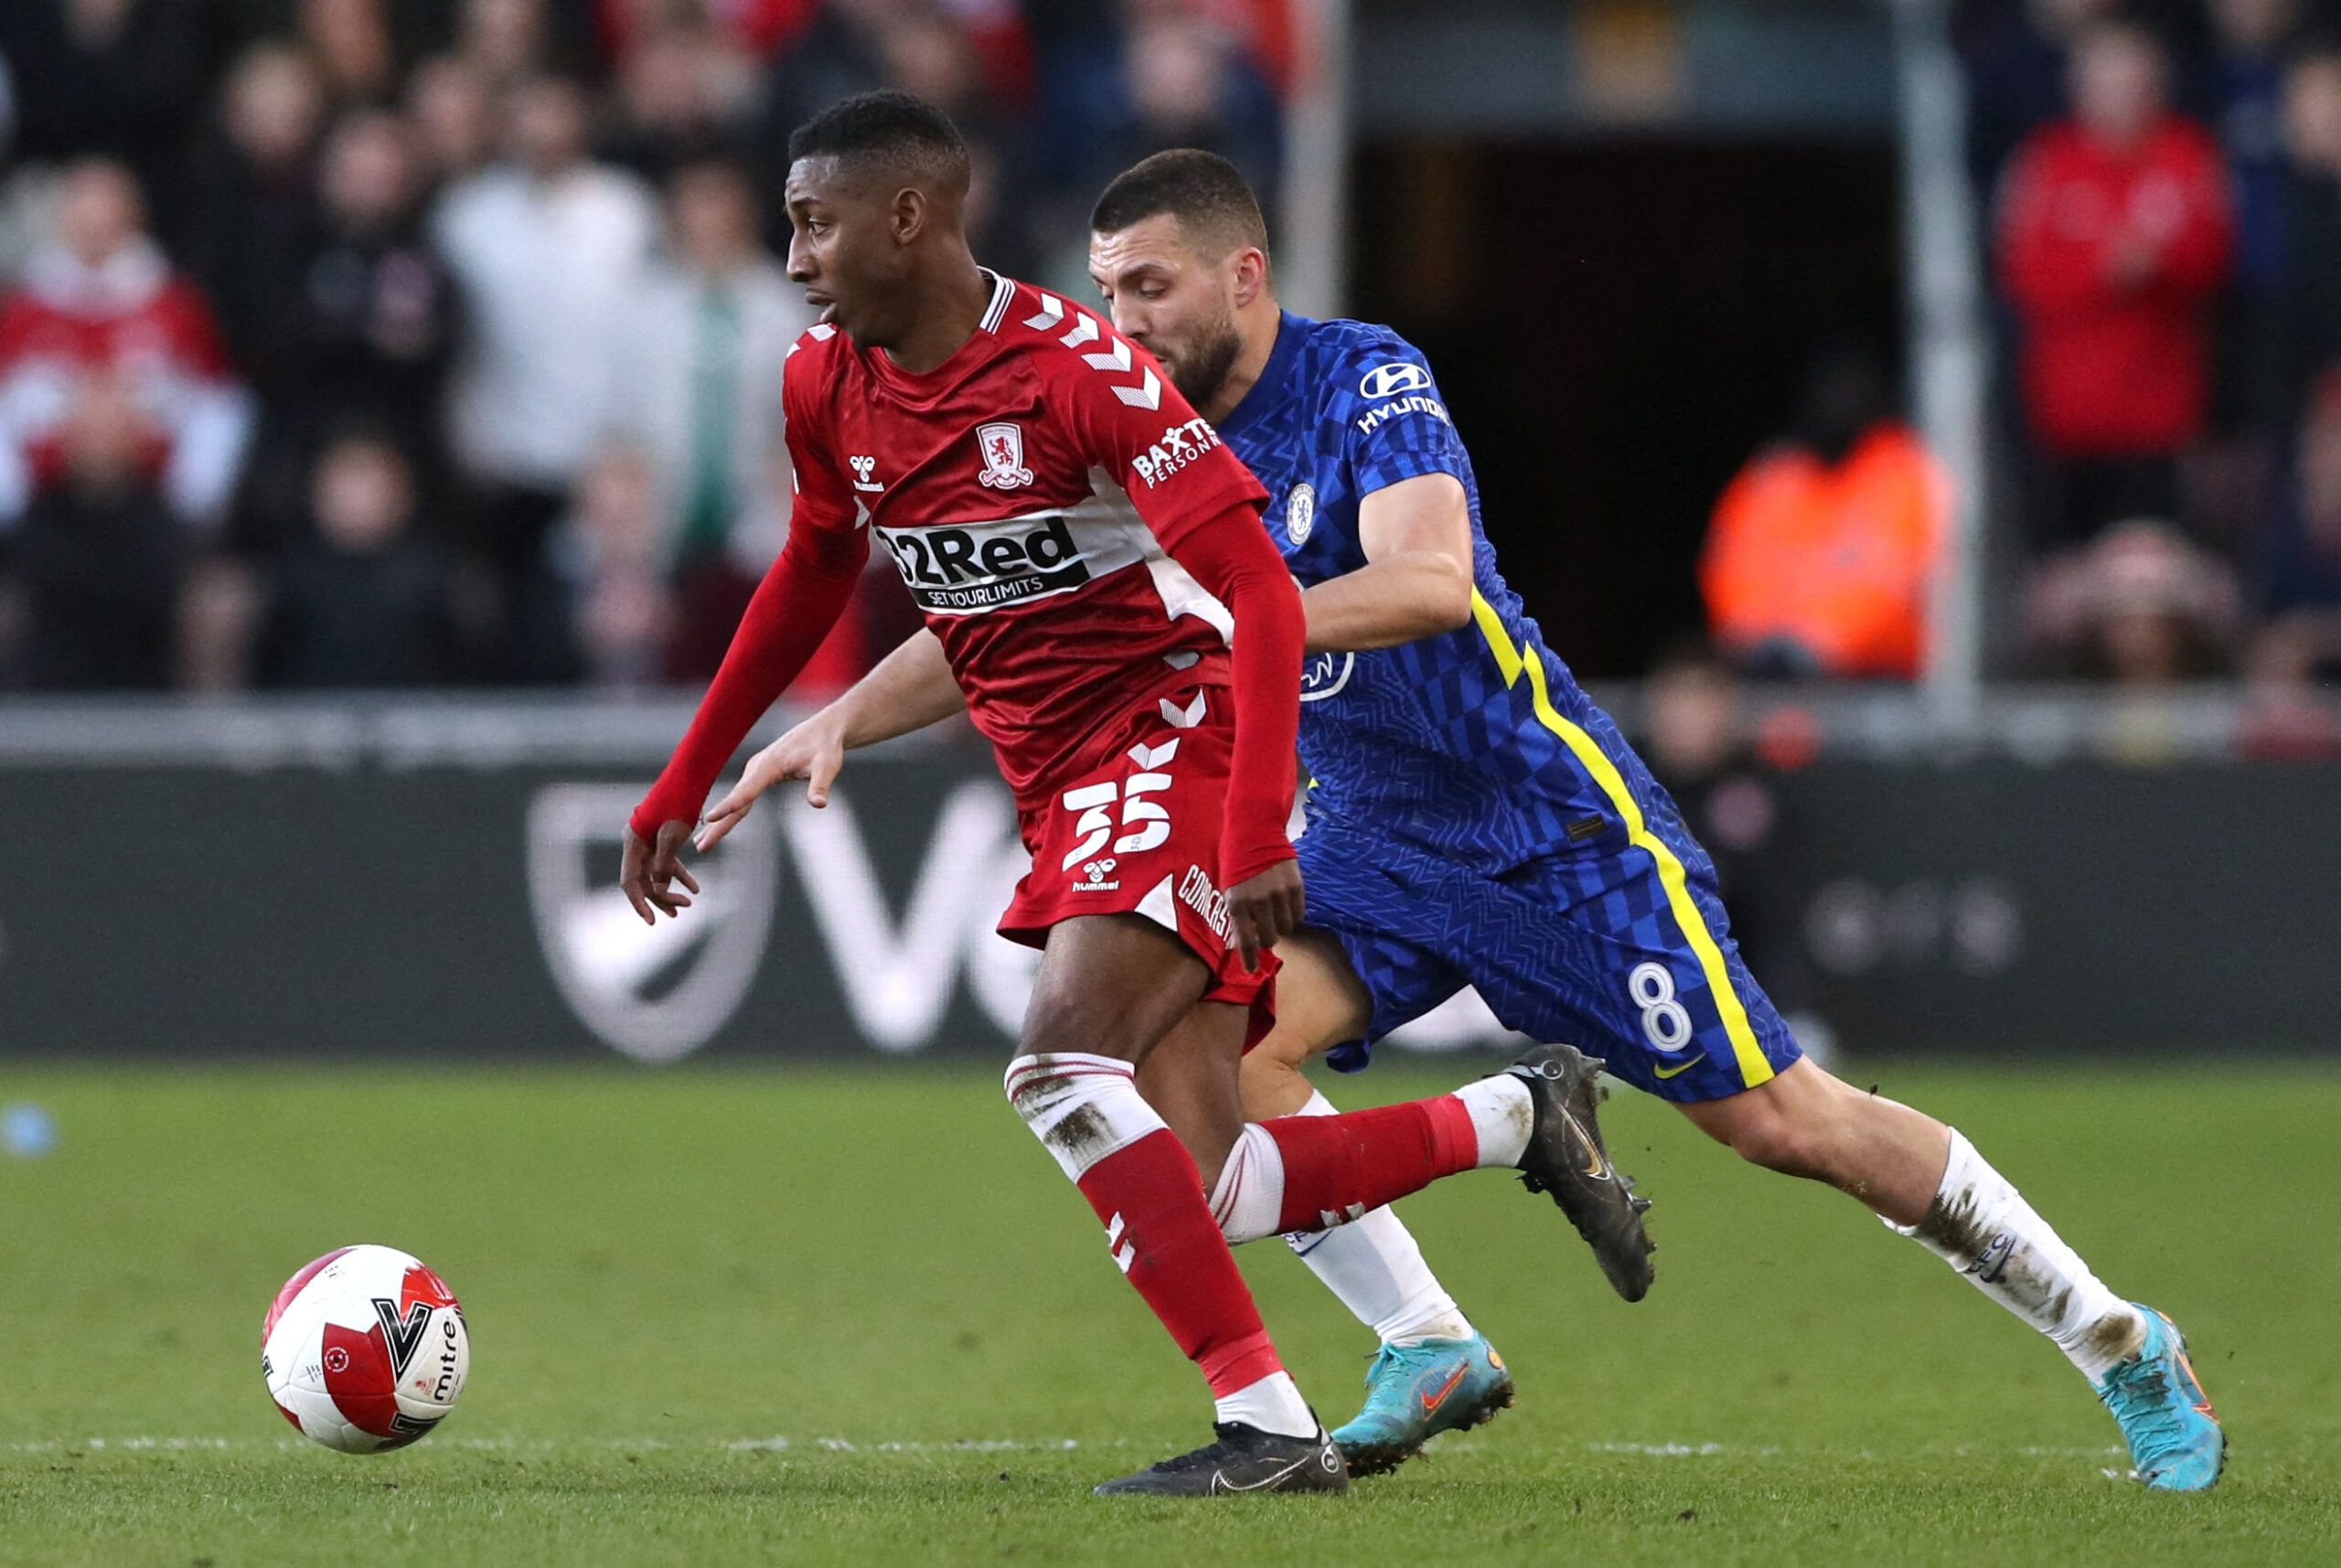 Soccer Football - FA Cup Quarter Final - Middlesbrough v Chelsea - Riverside Stadium, Middlesbrough, Britain - March 19, 2022 Middlesbrough's Isaiah Jones in action with Chelsea's Mateo Kovacic REUTERS/Scott Heppell